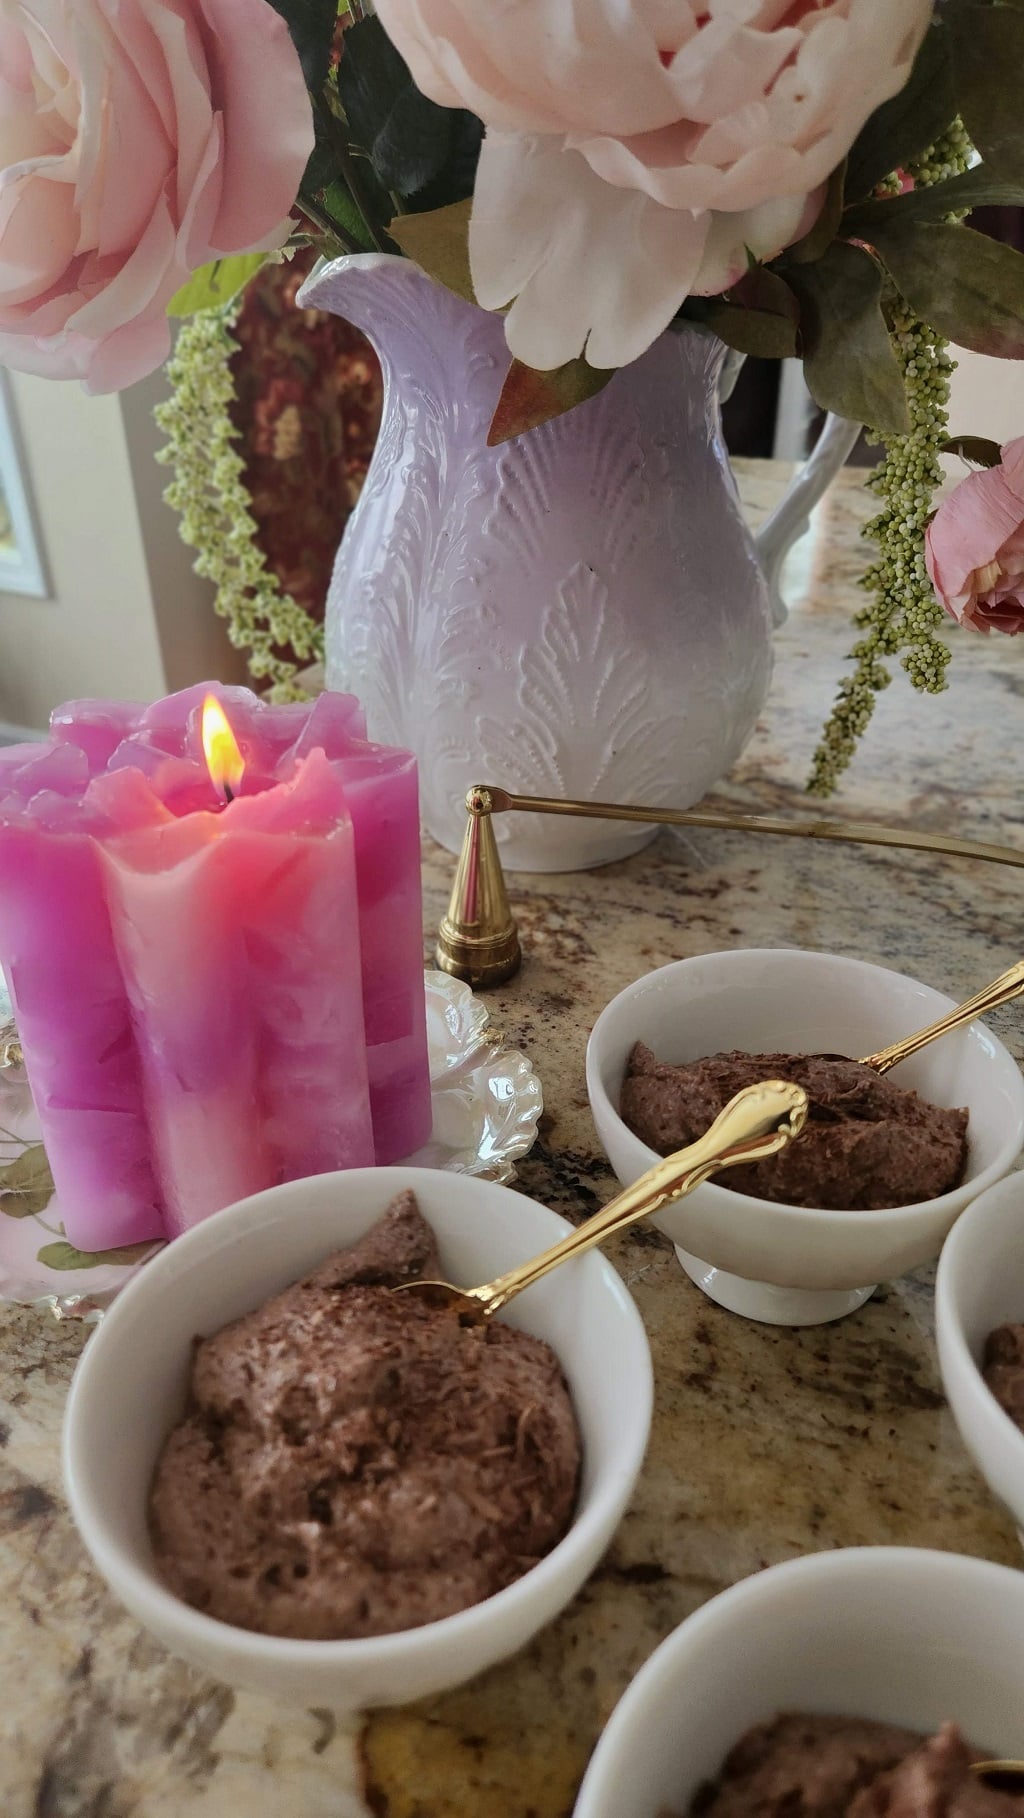 Easy 3 Ingredient Chocolate Mousse Recipe Made in Minutes